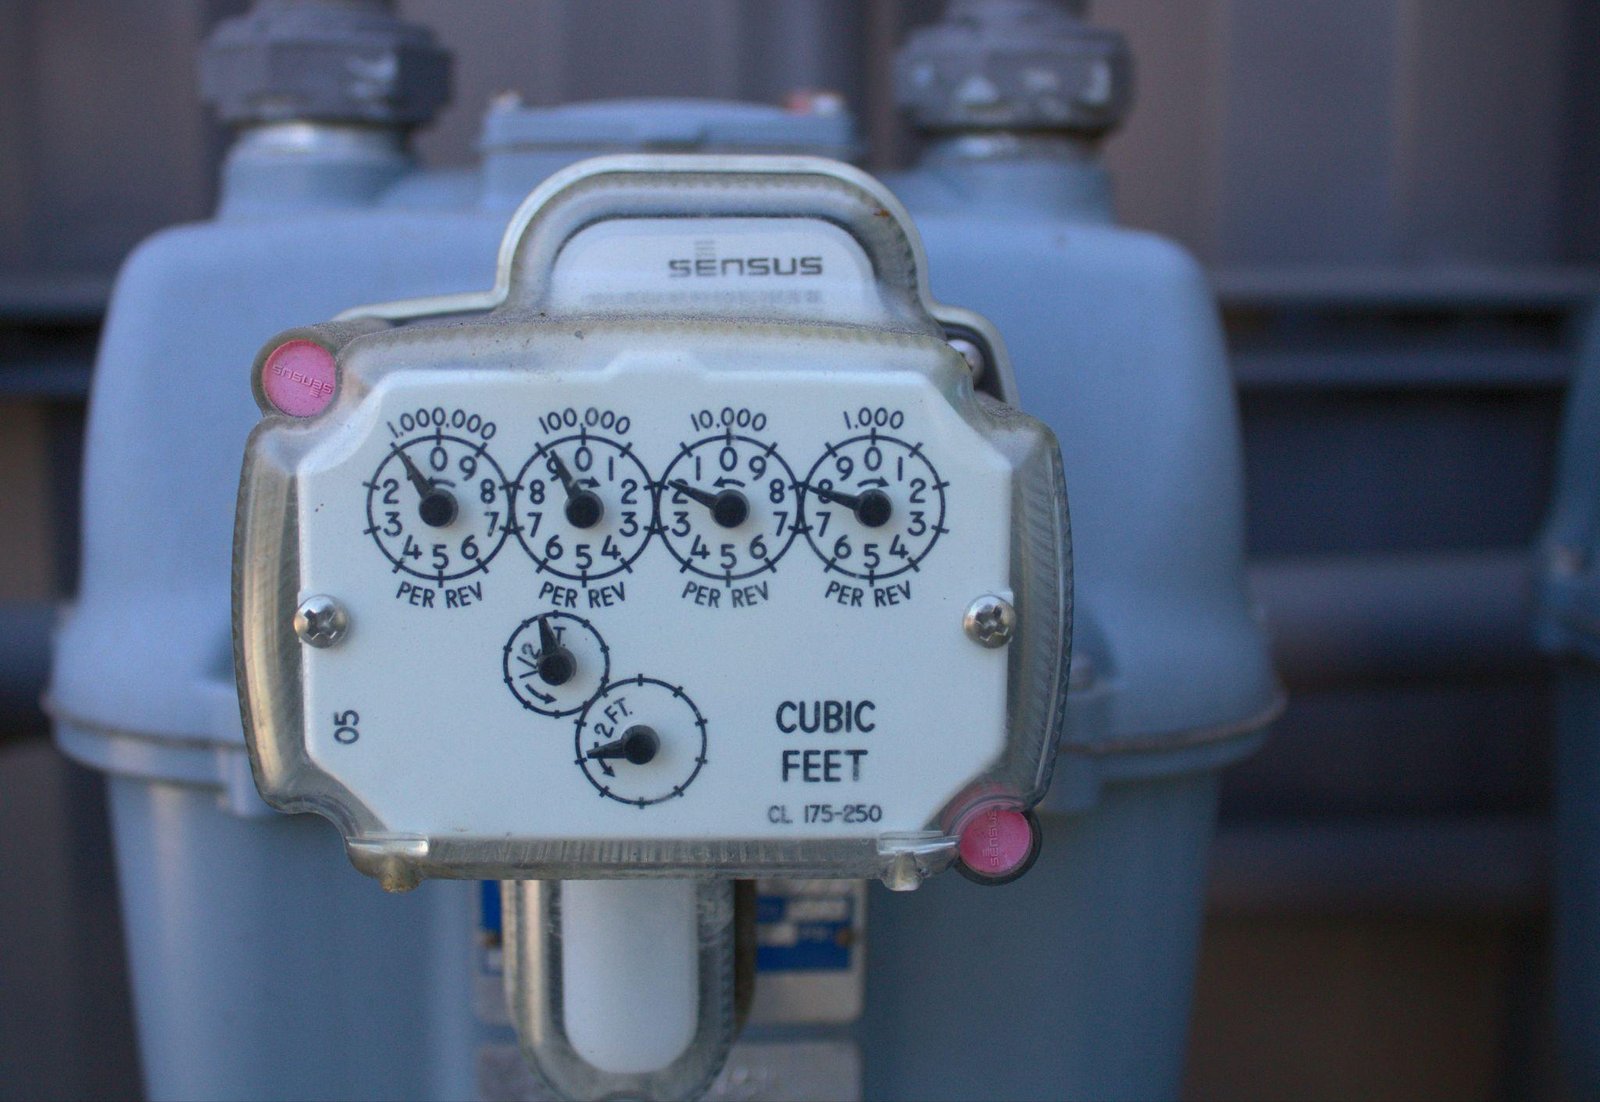 Close-up of a meter

Description automatically generated